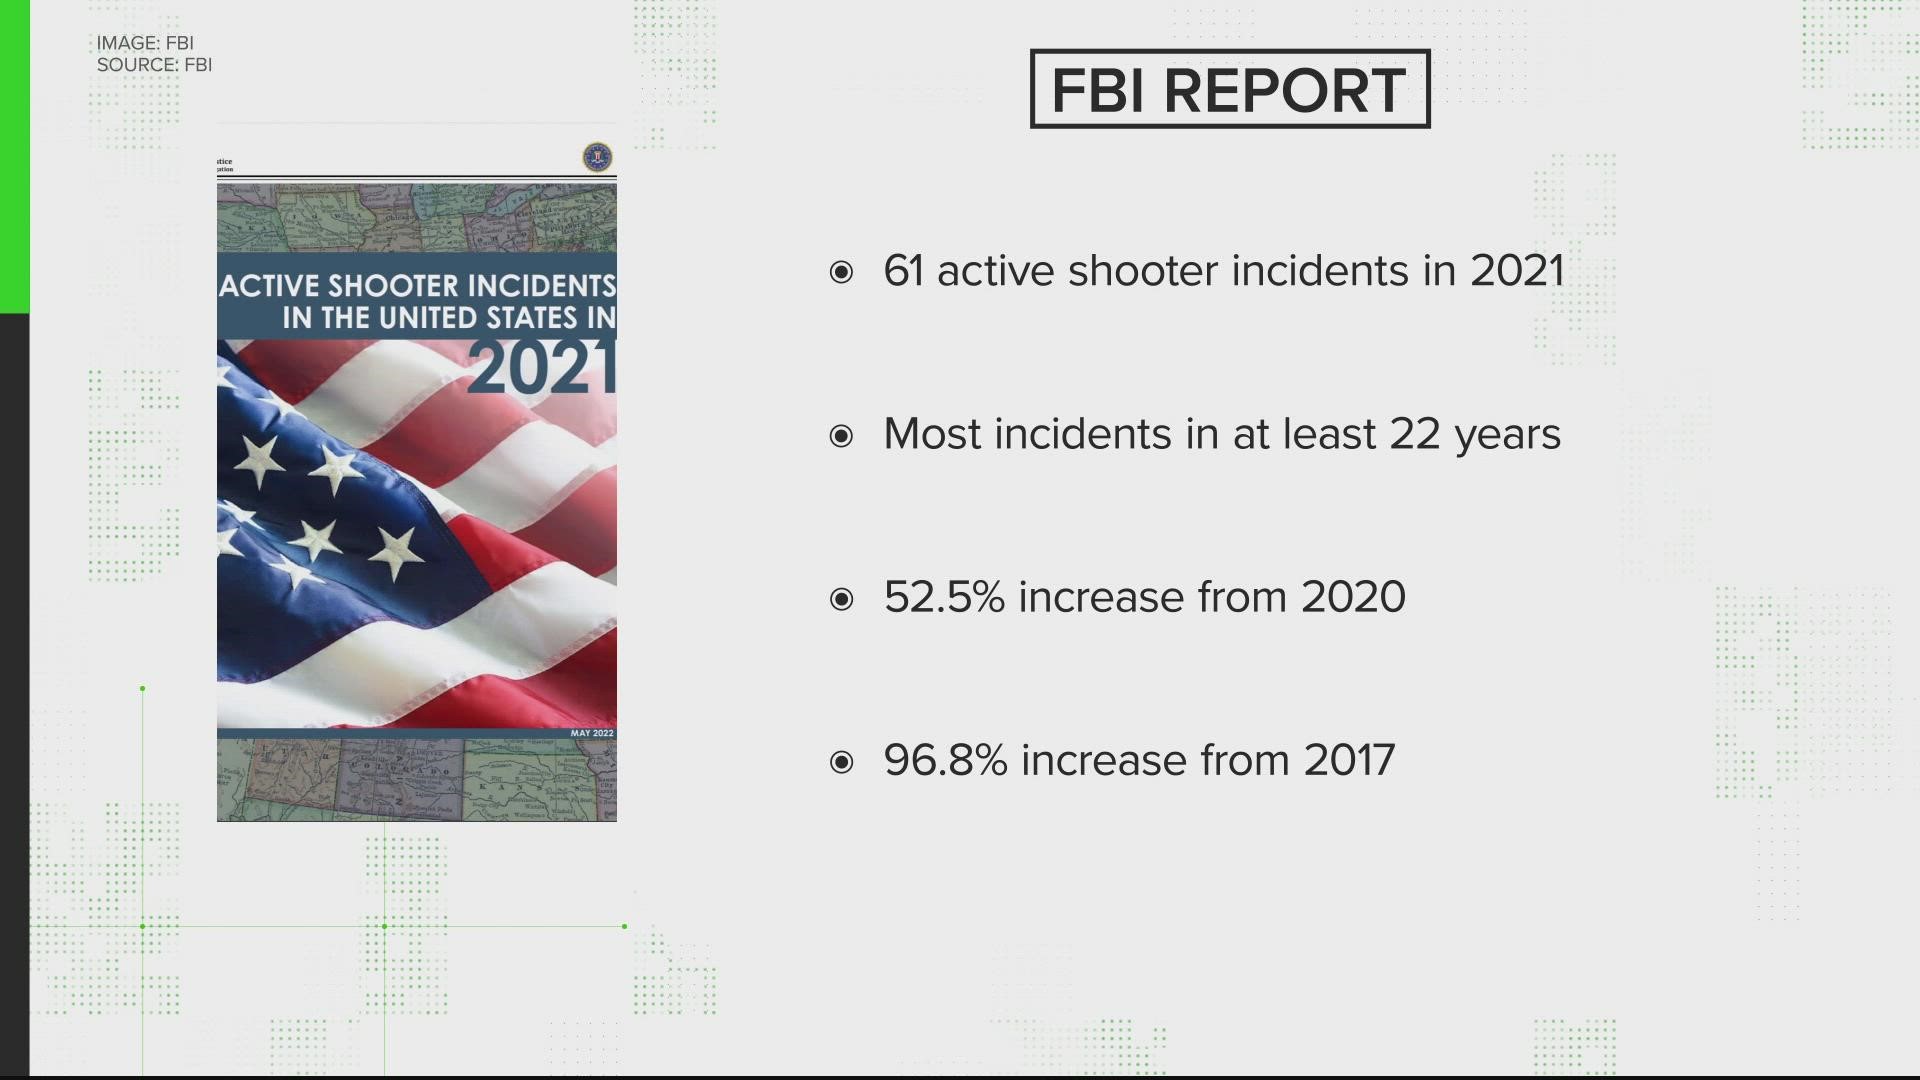 The FBI reported 61 active shooter incidents in 2021, which is the most incidents in the last 22 years that they have been tracking.